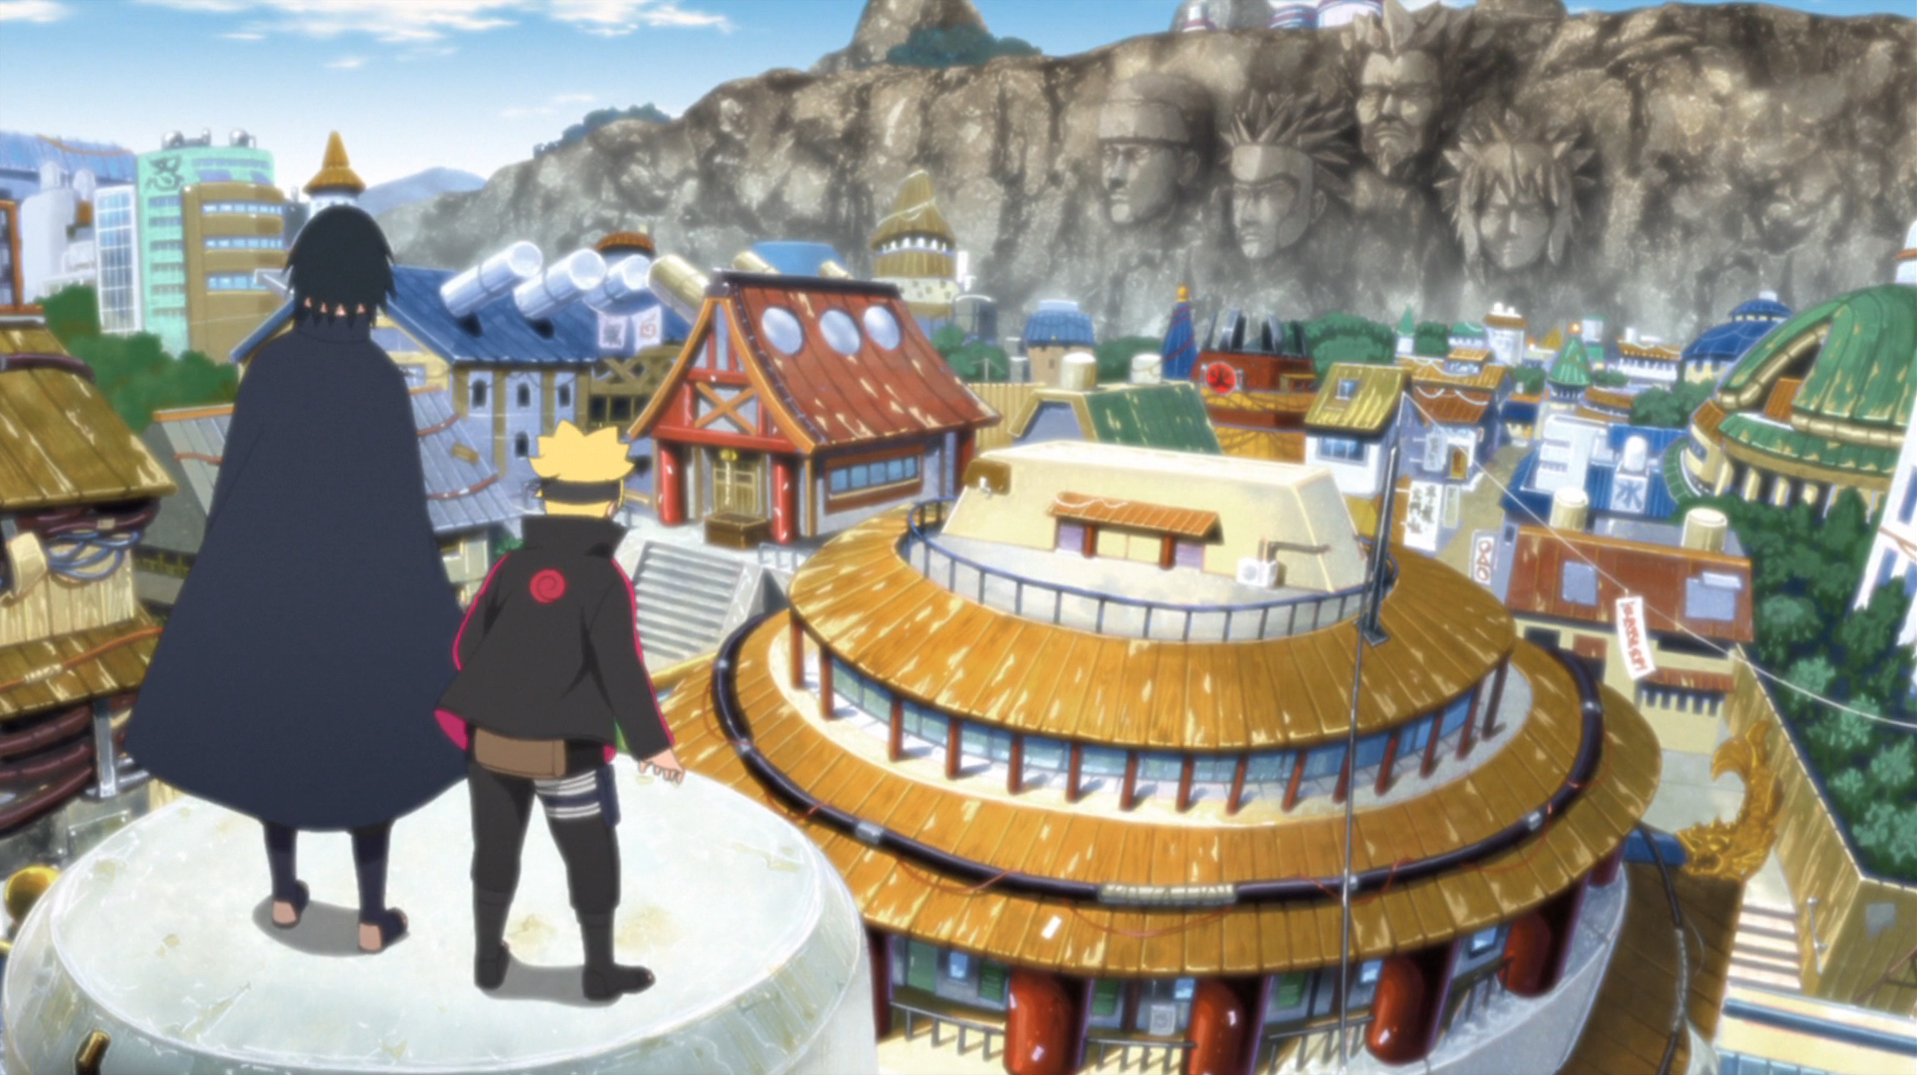 Last scene of the last episode of Naruto Classic: Goodbye, Hidden Leaf  Village, for now <3